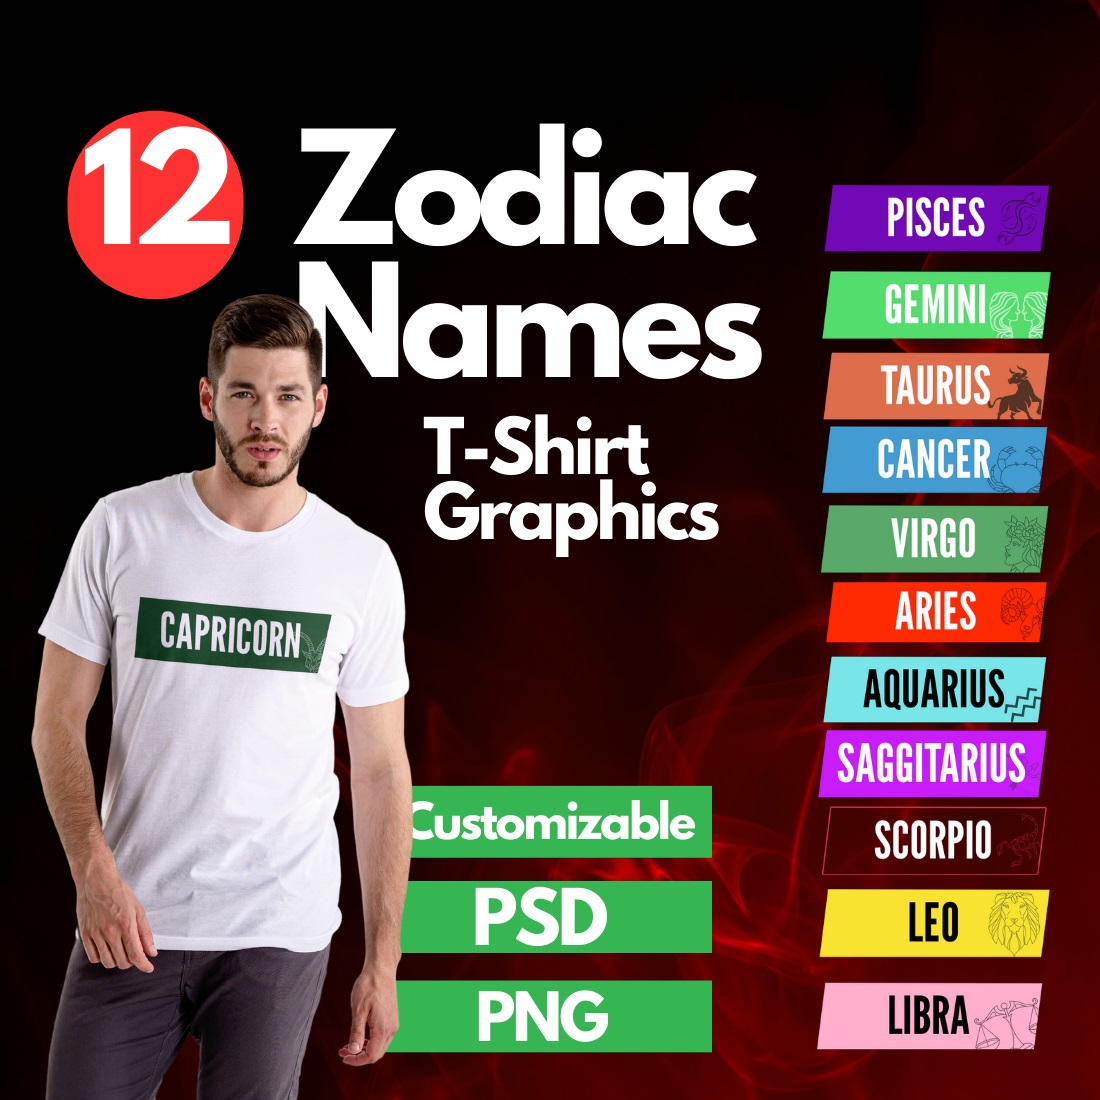 Zodiac Sign T-Shirt Graphics: 12 High-Quality Designs for Personal or Commercial Use cover image.